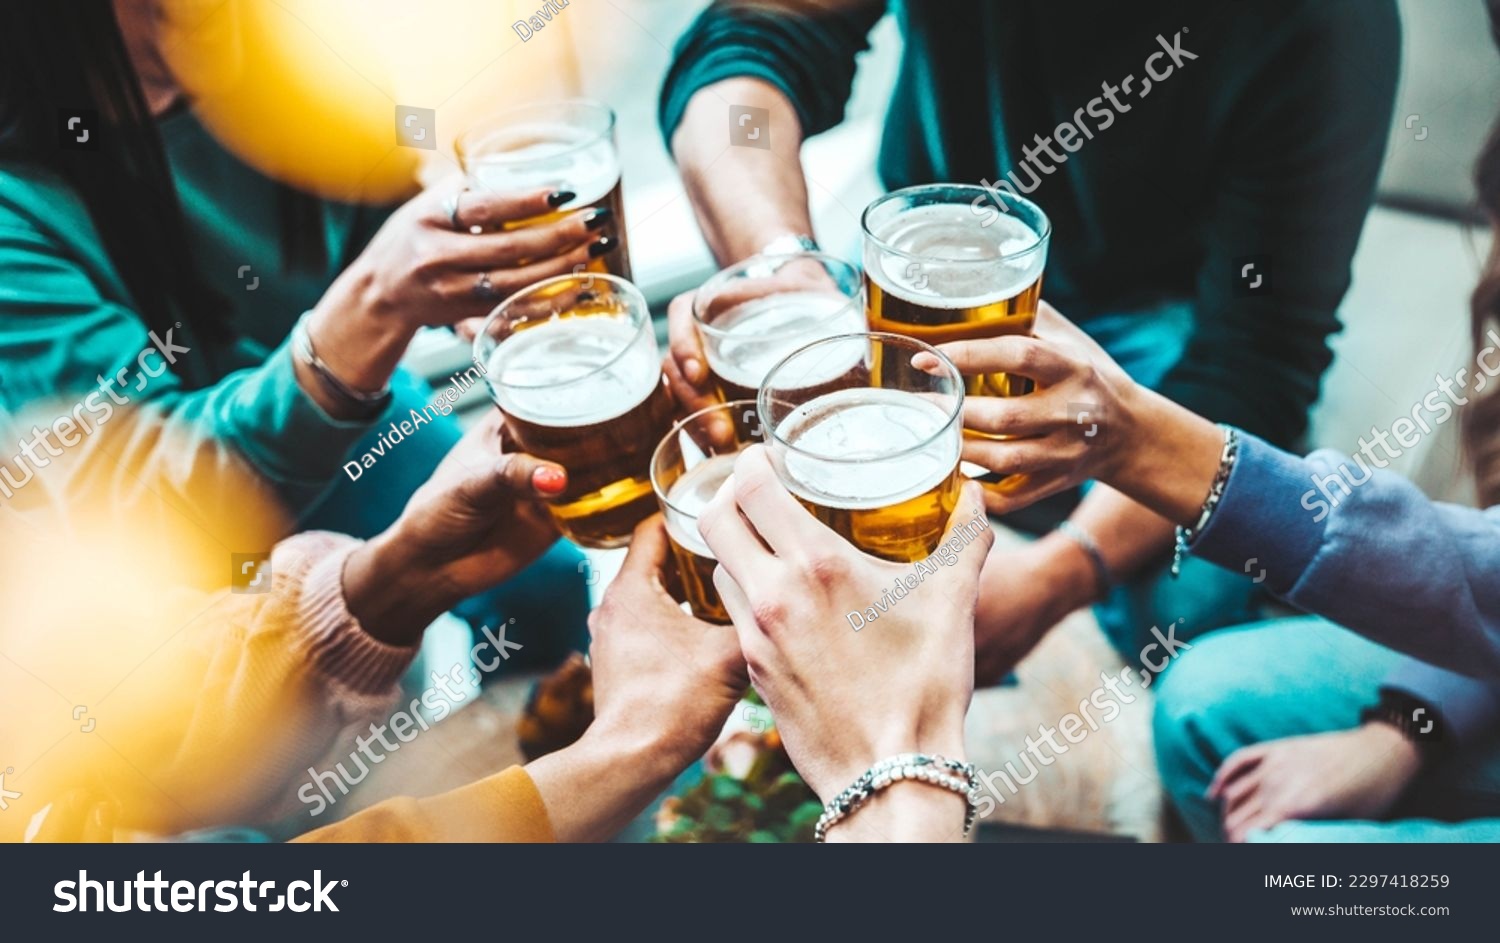 Group of people drinking beer at brewery pub restaurant - Happy friends enjoying happy hour sitting at bar table - Closeup image of brew glasses - Food and beverage lifestyle concept #2297418259